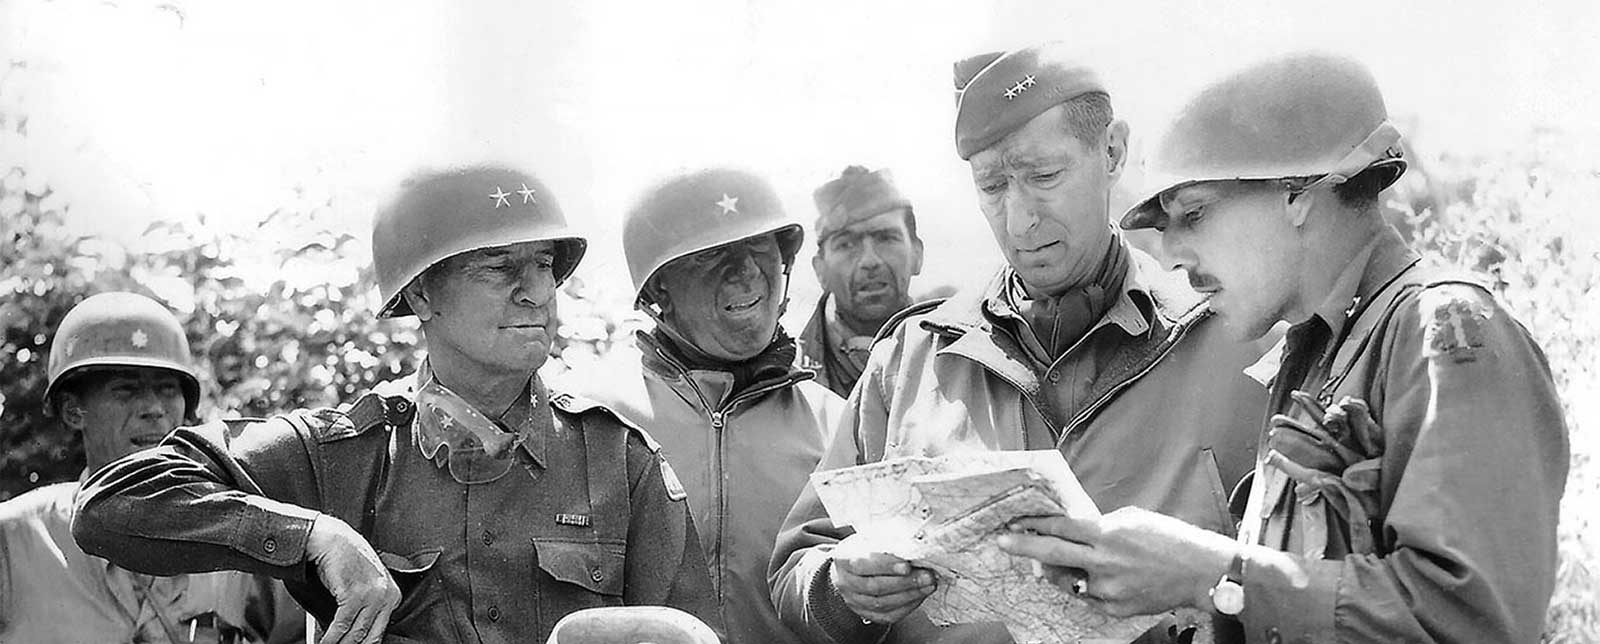 BG Frederick <i>(Image credit: right), LTG Mark W. Clark (second from right), and other Fifth U.S. Army officers review a map on the morning of 4 June 1944, the day of Rome’s liberation.